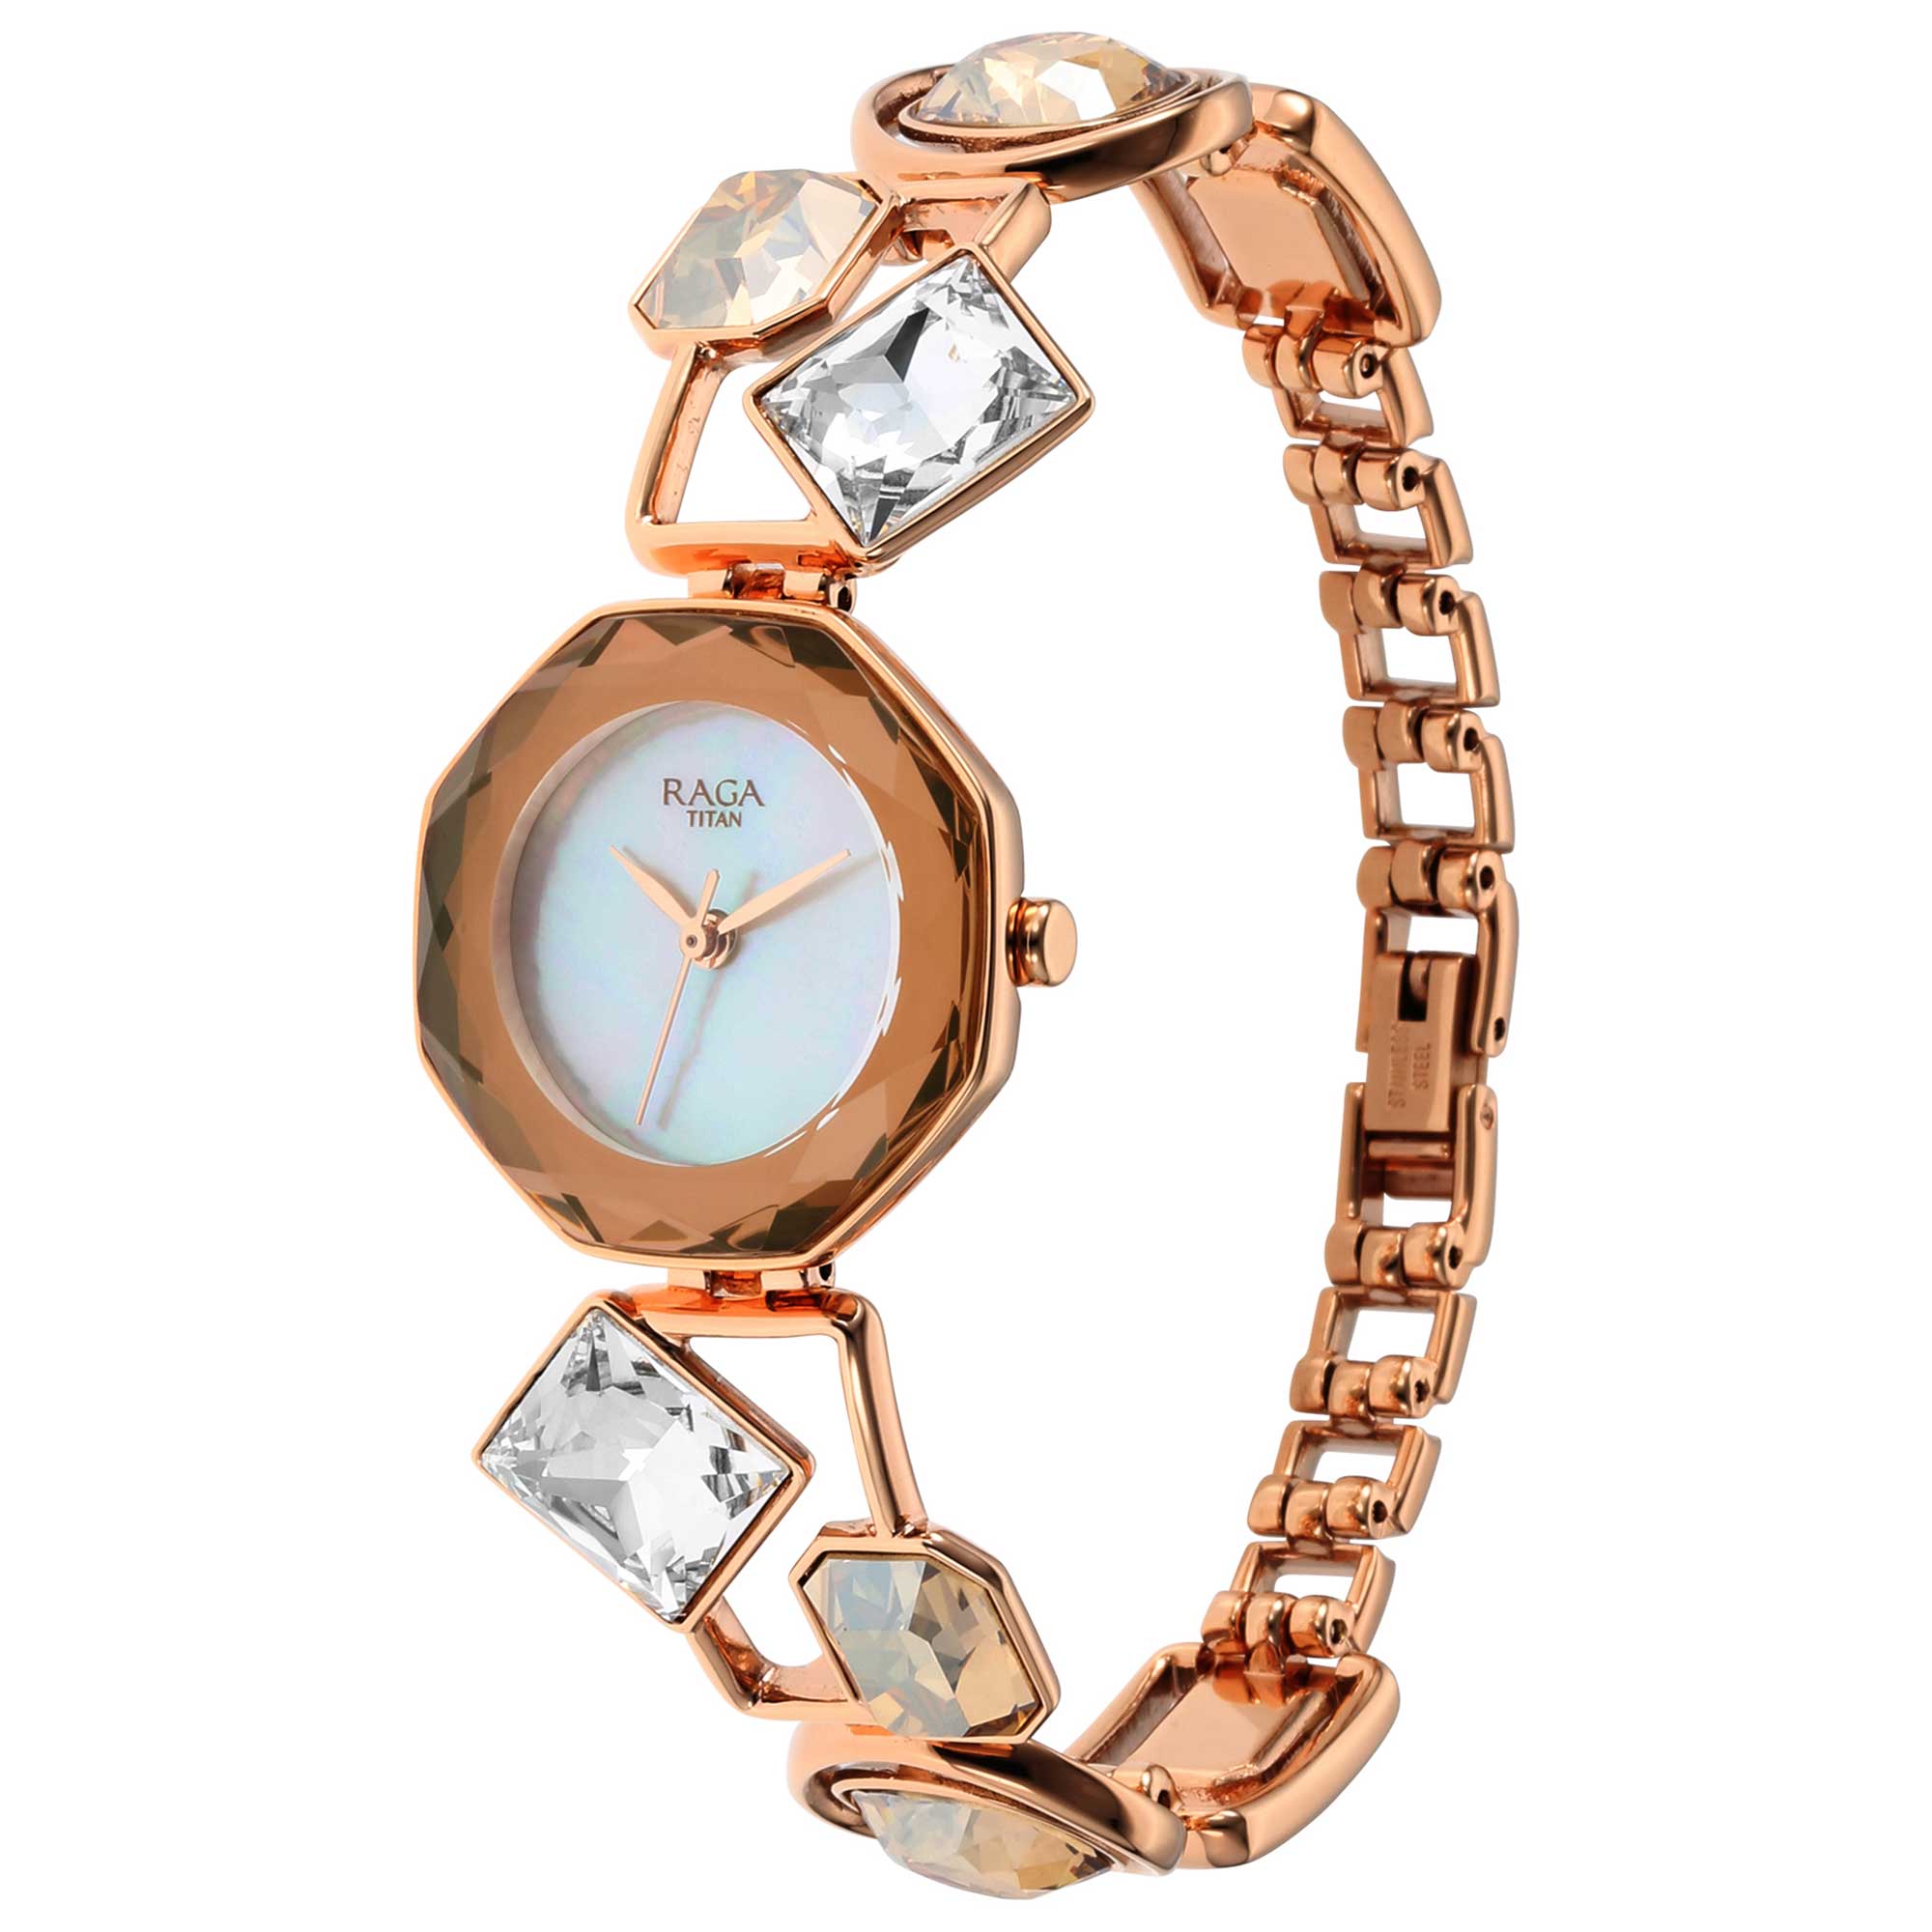 Titan Love All Analog Mother of pearl Dial Metal Strap Watch for Women